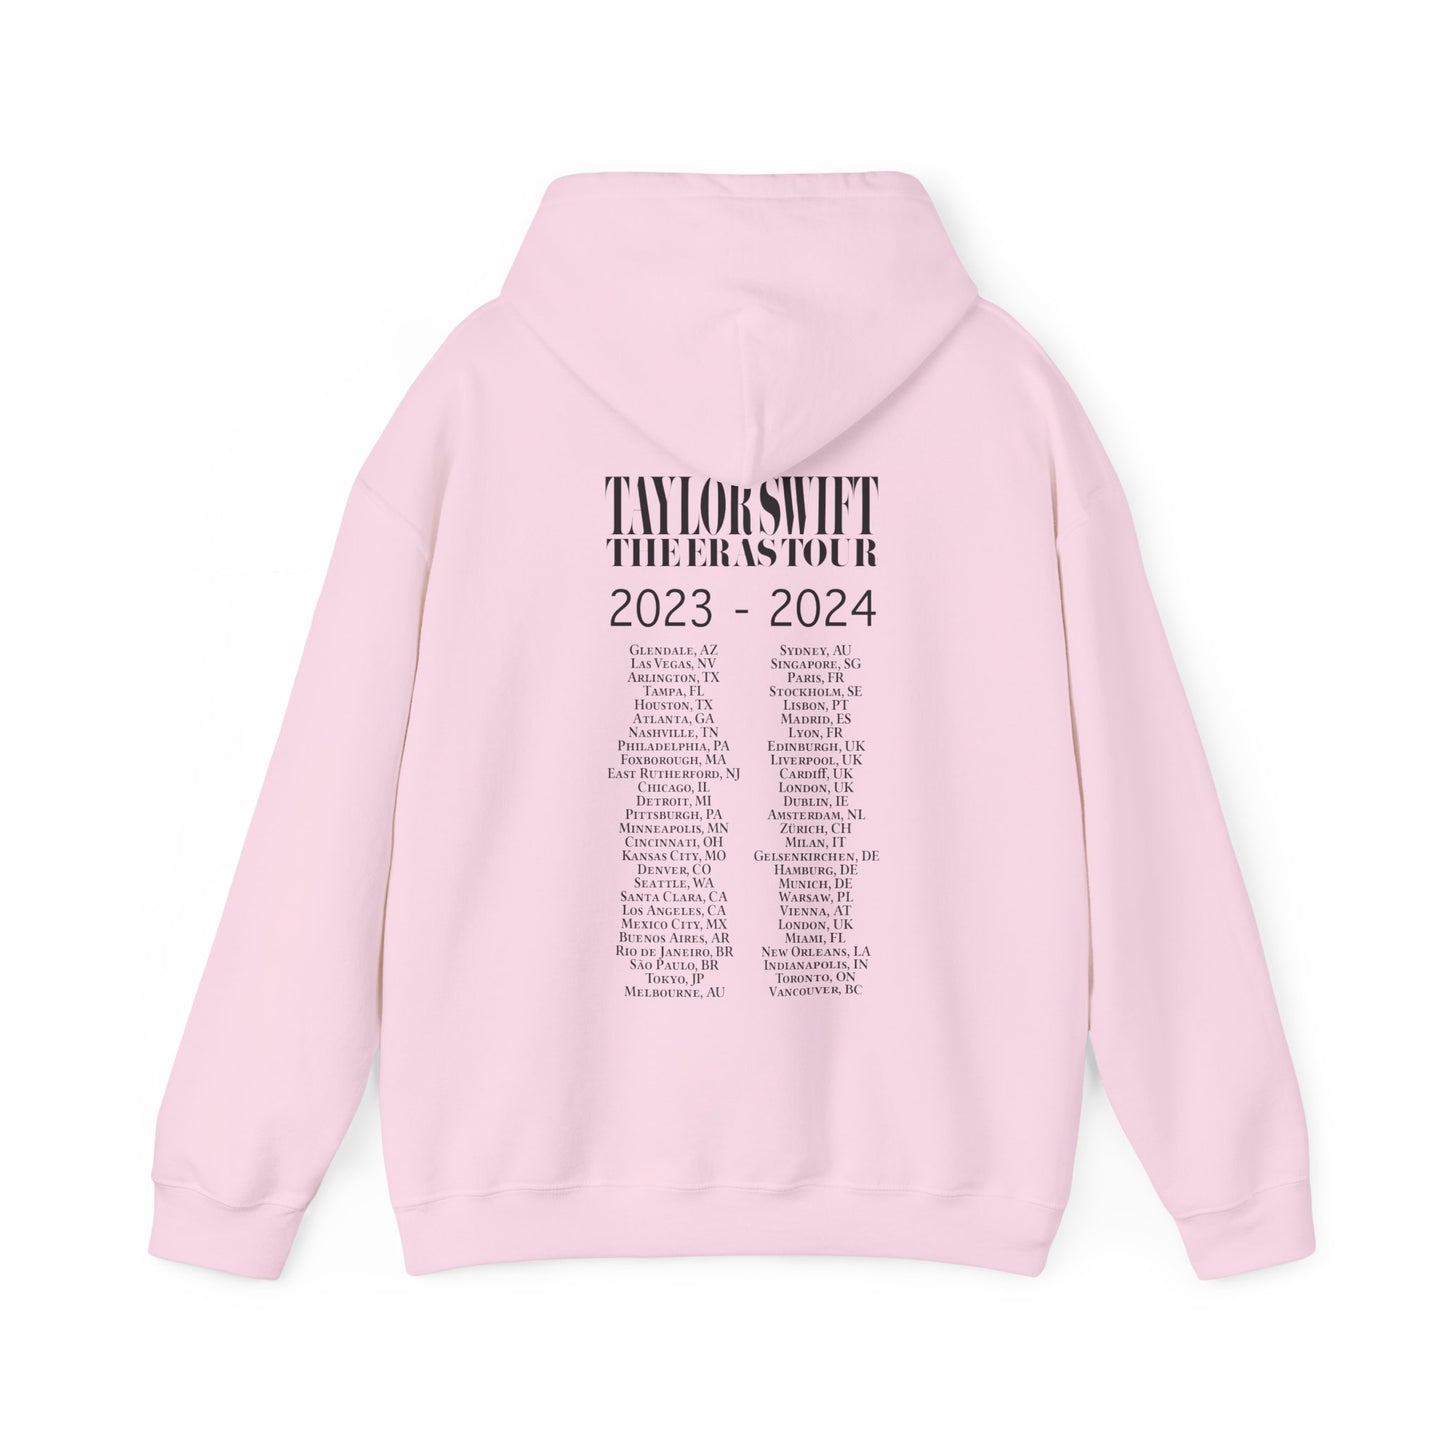 THE ERAS TOUR - ONLINE ONLY PINK TOUR DATES COTTON HOODIE